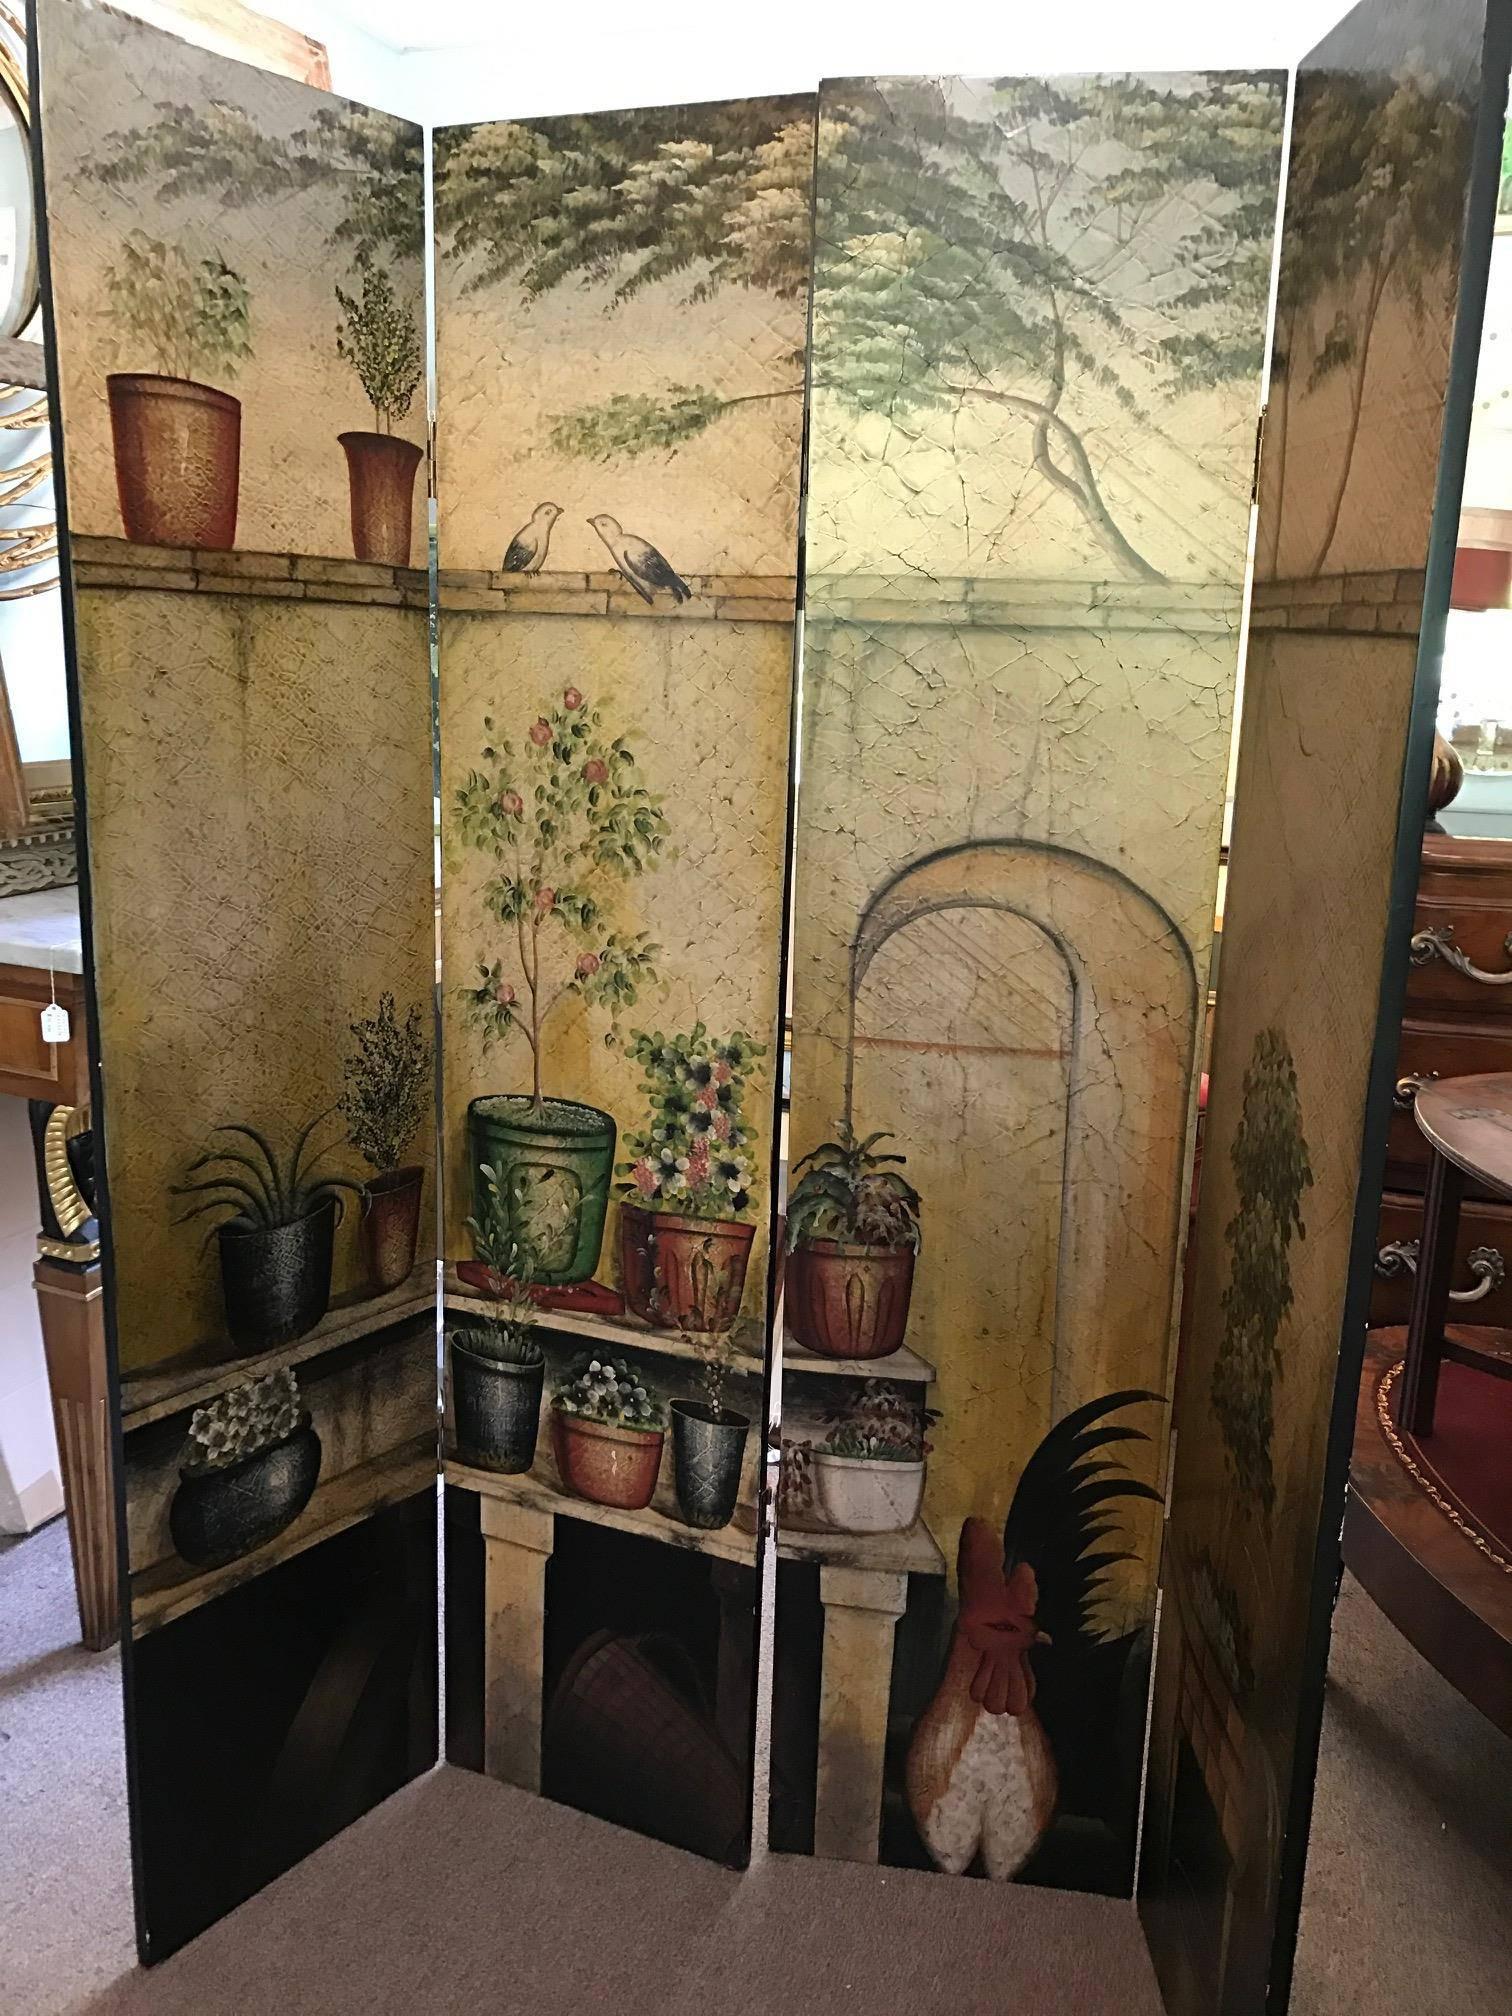 French cafe room divider - French country design and colors - cock a doodle doo! Fantastic scene of a grand great cock, birds, trees, jardinieres, European plaster walls and soft subtle colors. Great for any size room for privacy screen or